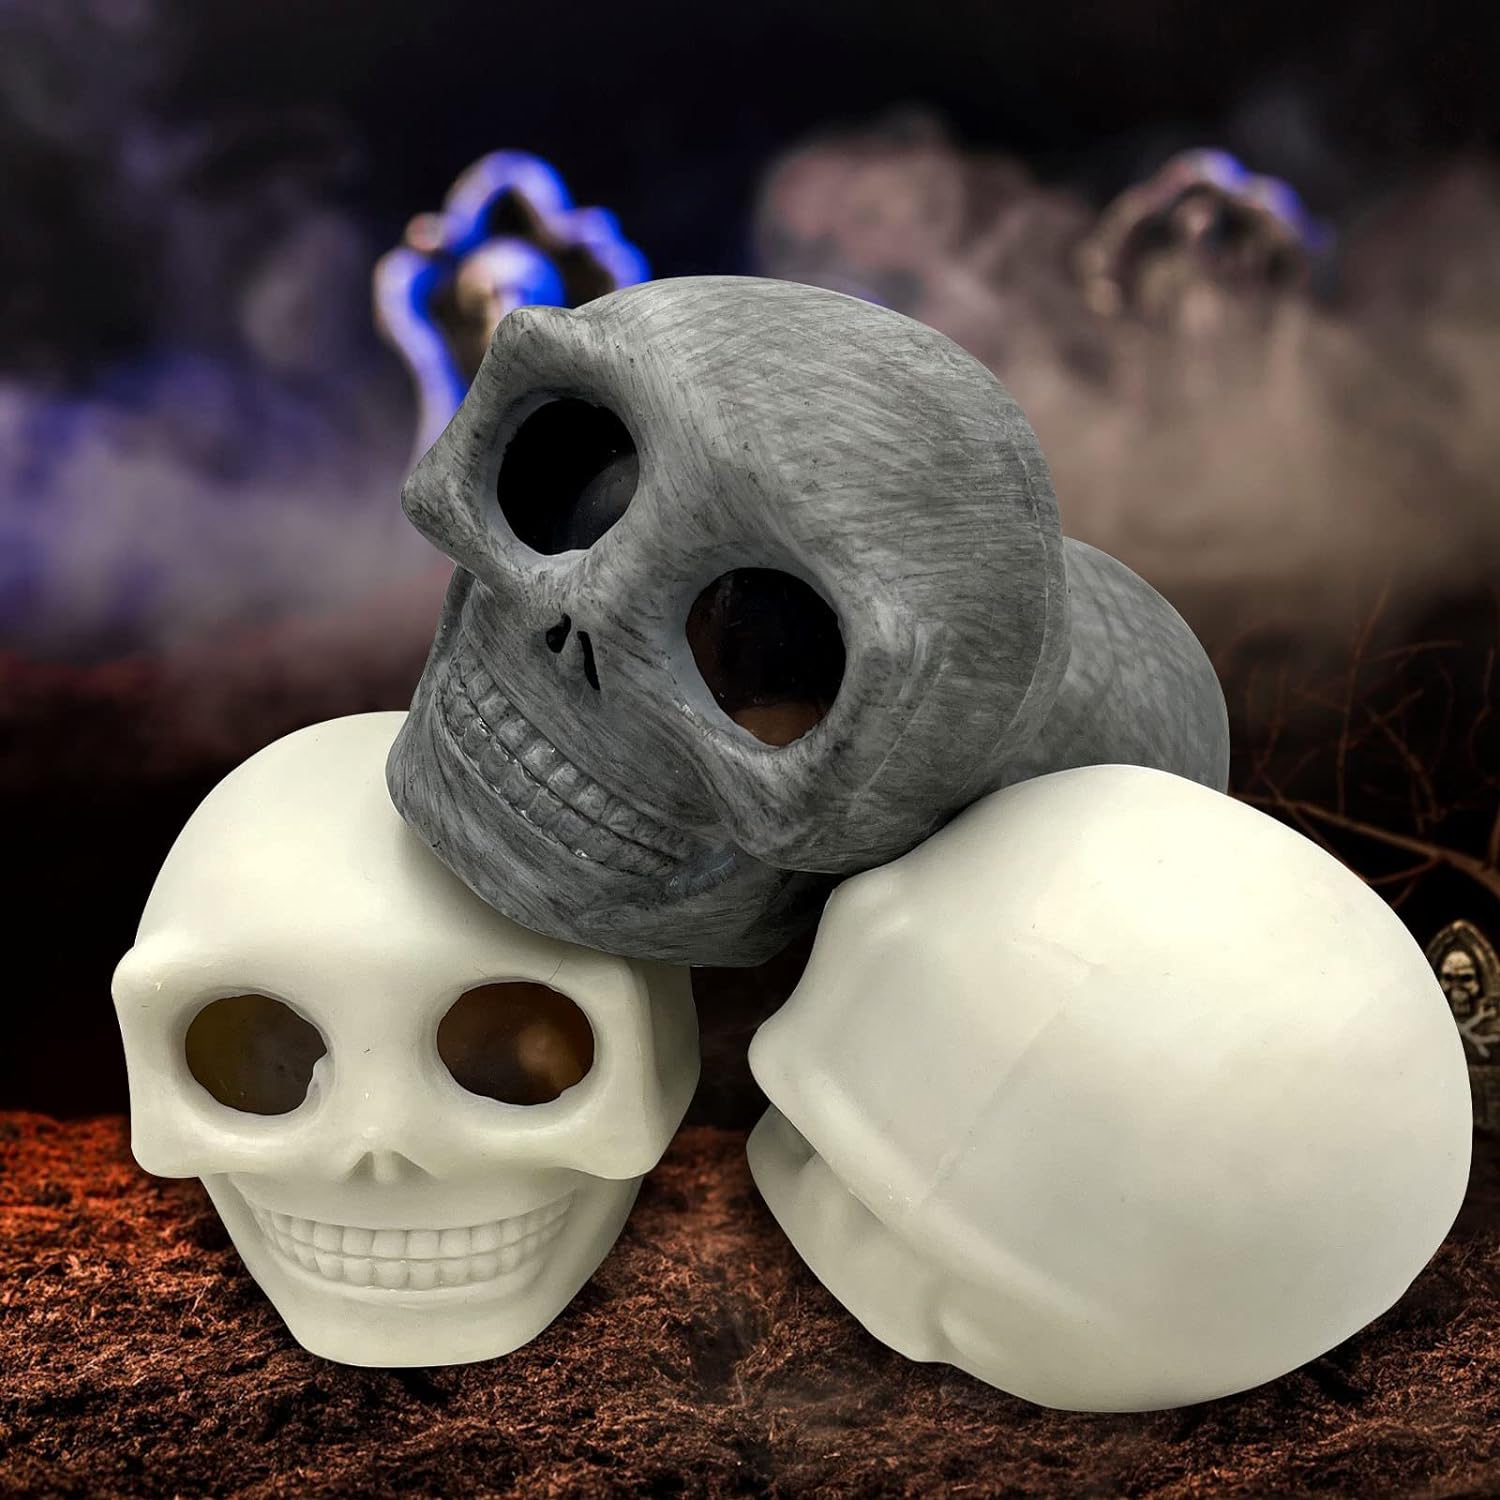 🌲EARLY CHRISTMAS SALE - 50% OFF🎁Crazy Panamanta Skull Squeeze Toy